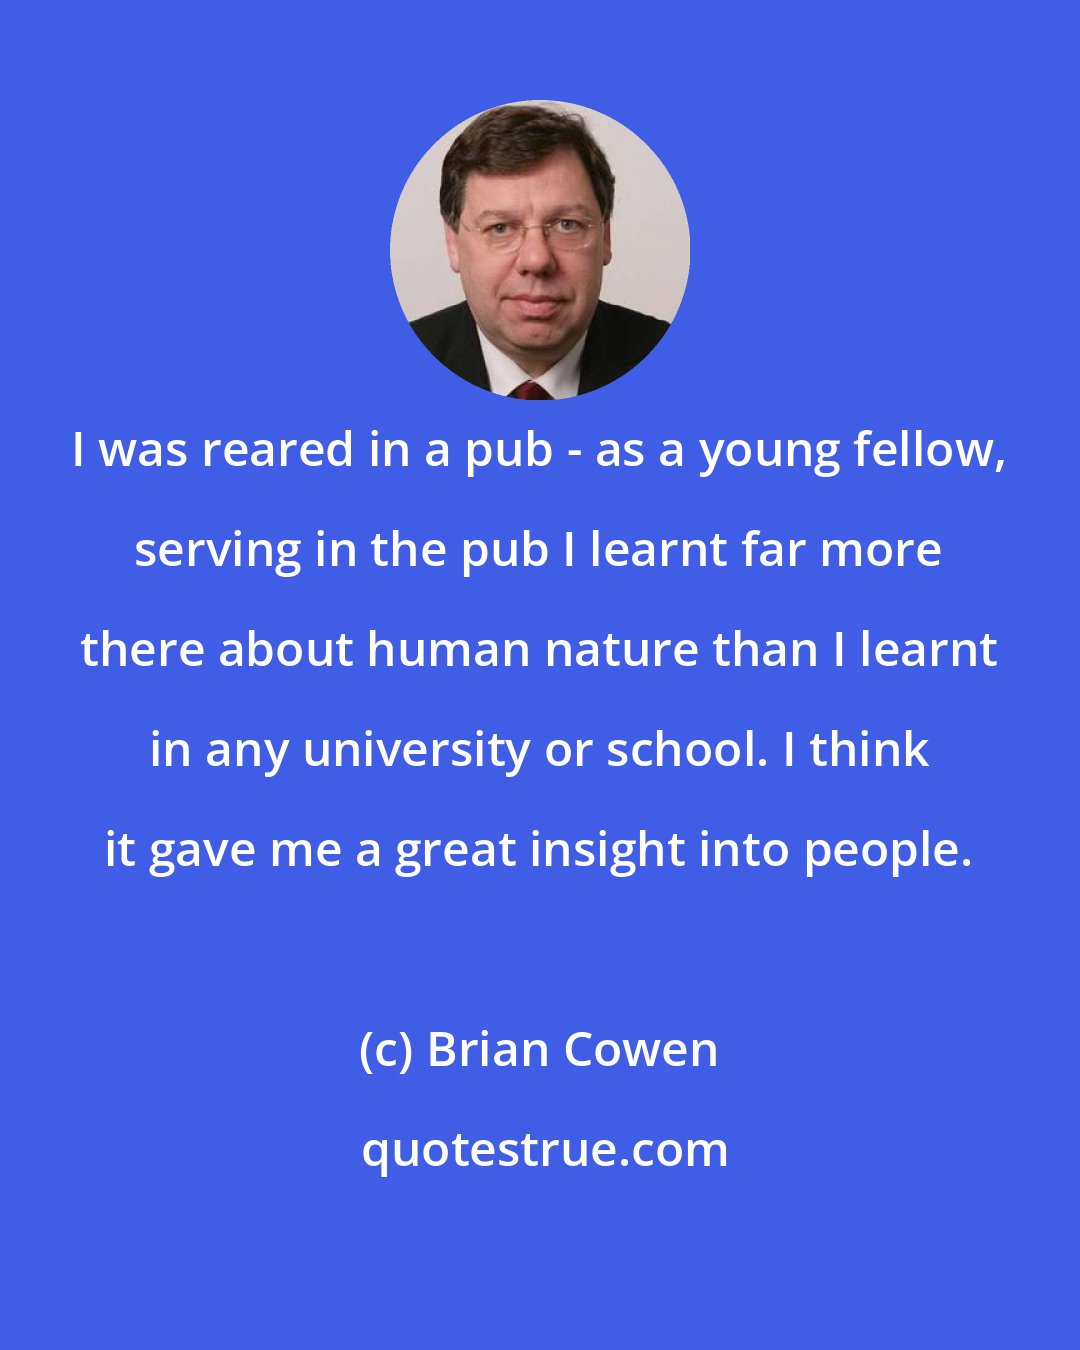 Brian Cowen: I was reared in a pub - as a young fellow, serving in the pub I learnt far more there about human nature than I learnt in any university or school. I think it gave me a great insight into people.